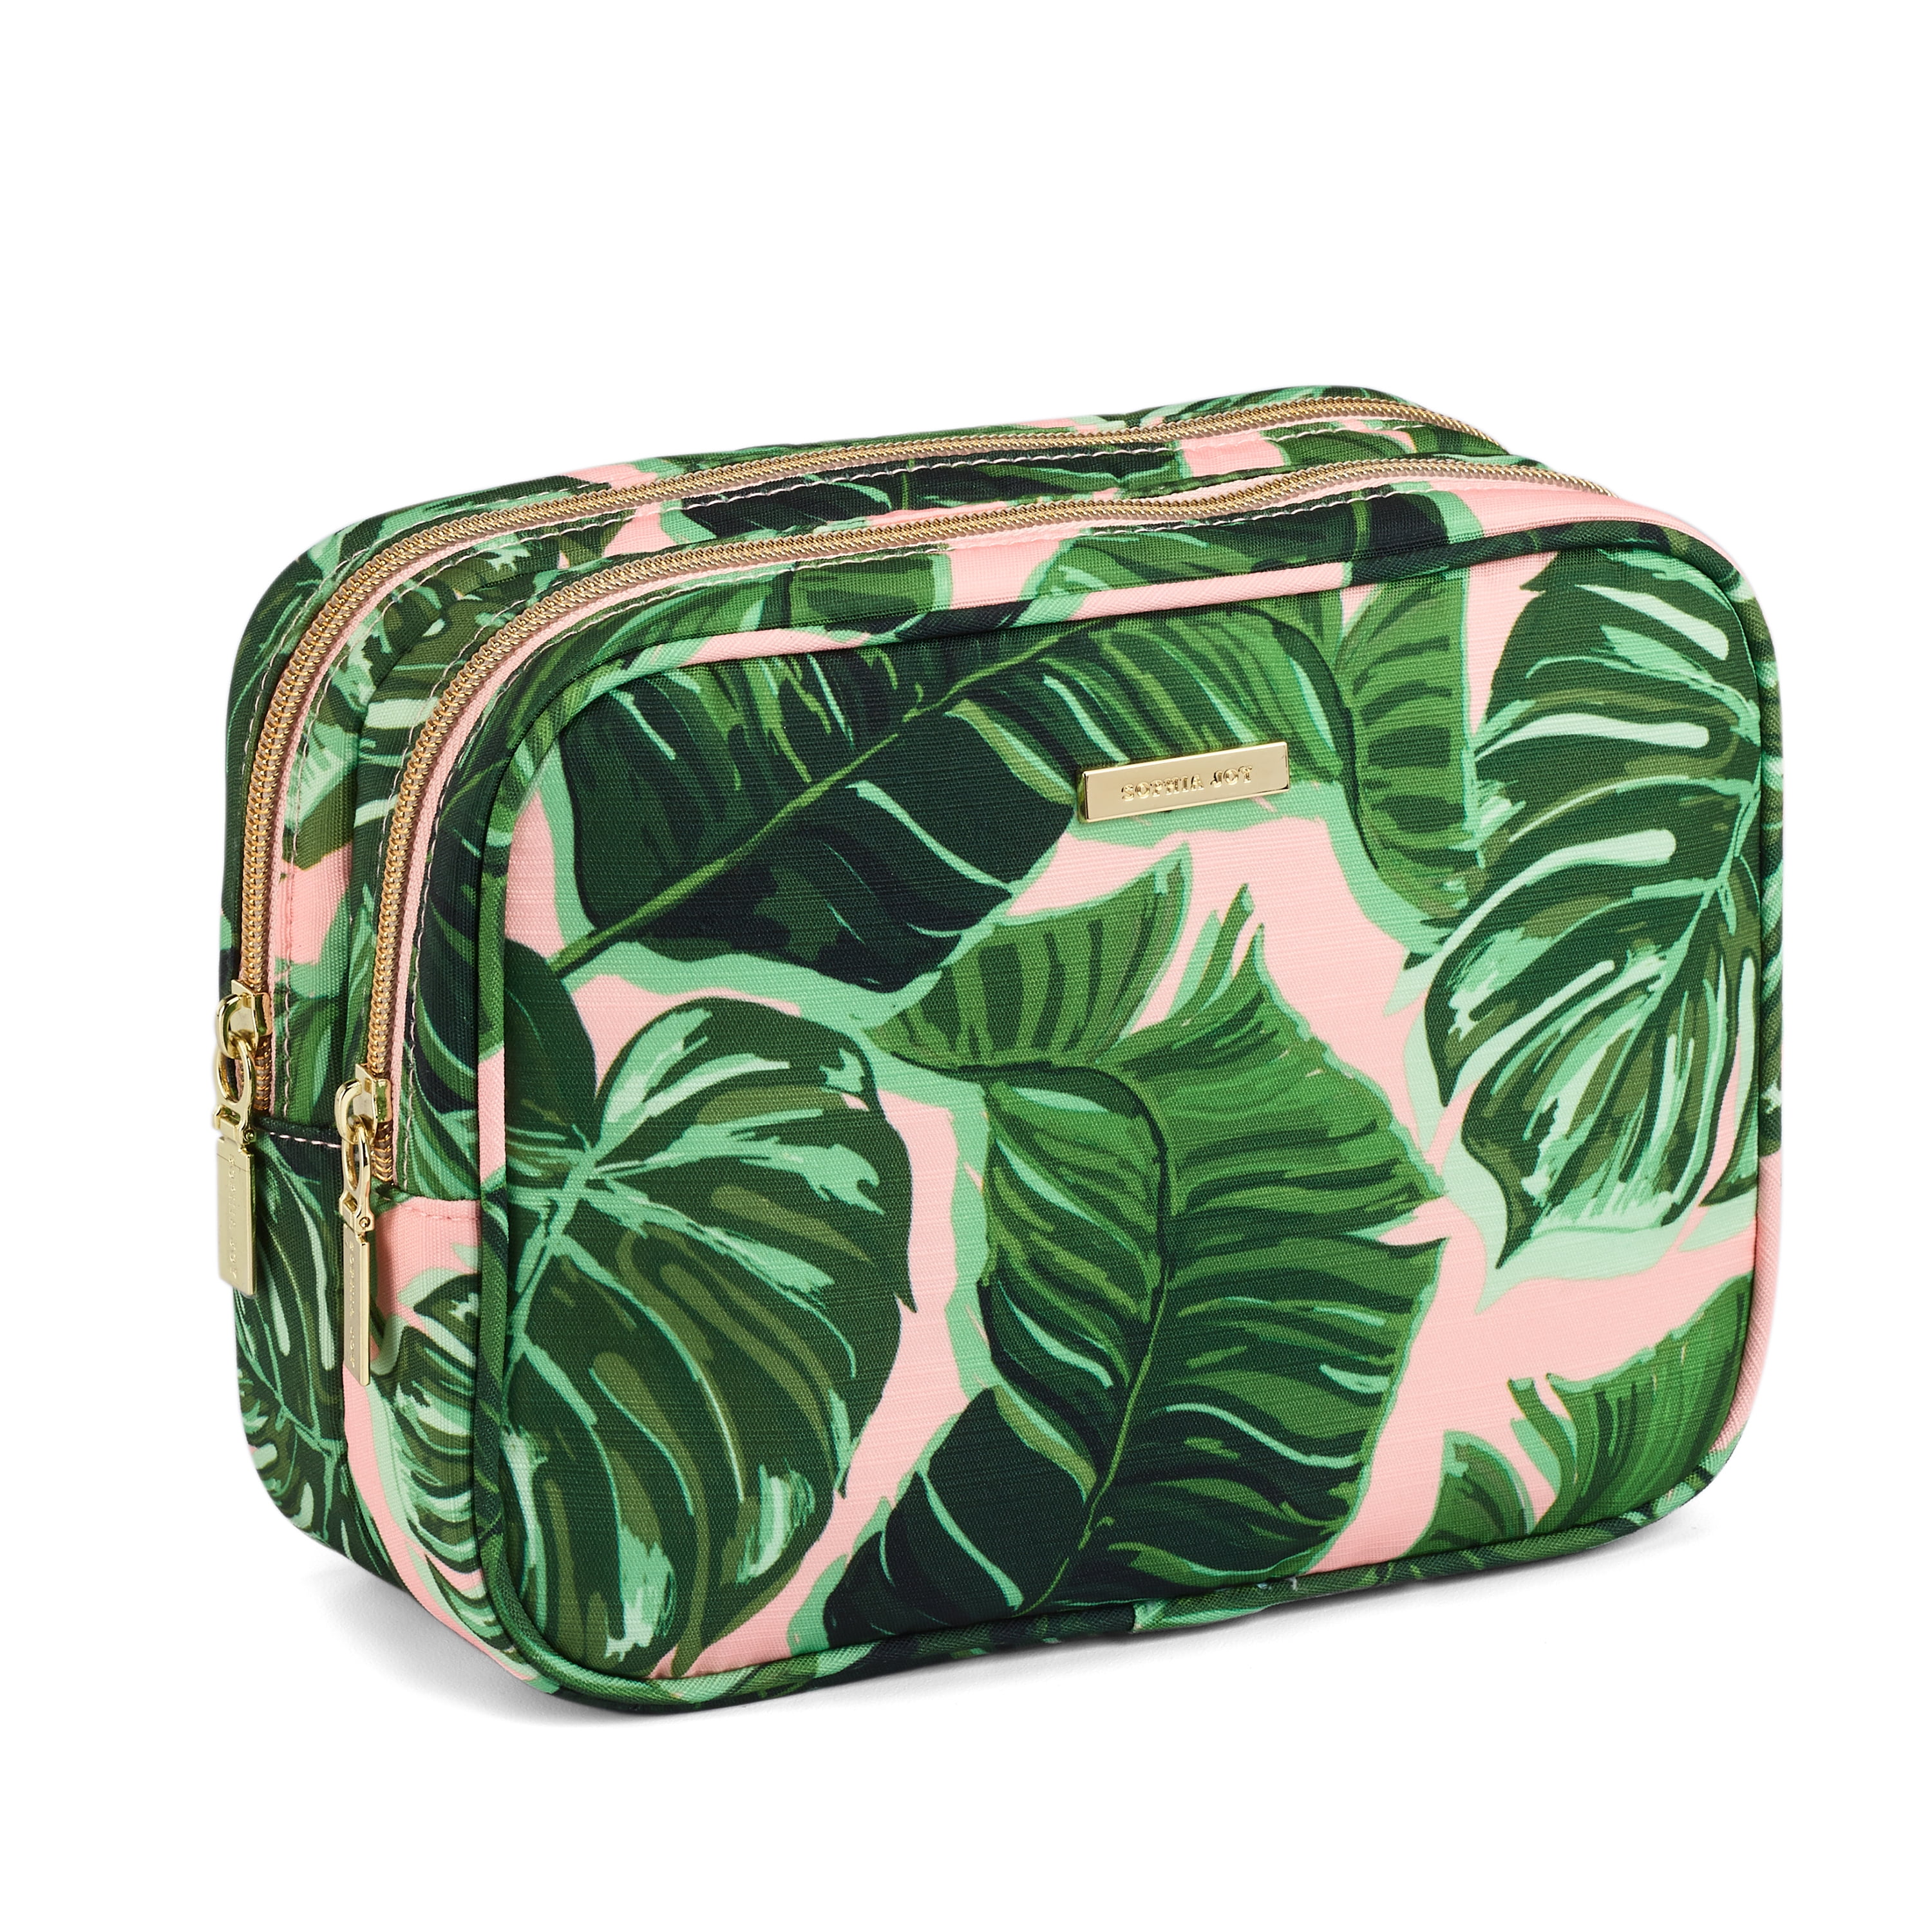 Sophia Joy Dual Zipper Compartment Travel Makeup & Accessory Organizer in  Pink & Green Whimsy Palm Fashion Pattern with Signature Gold Hardware -  Walmart.com